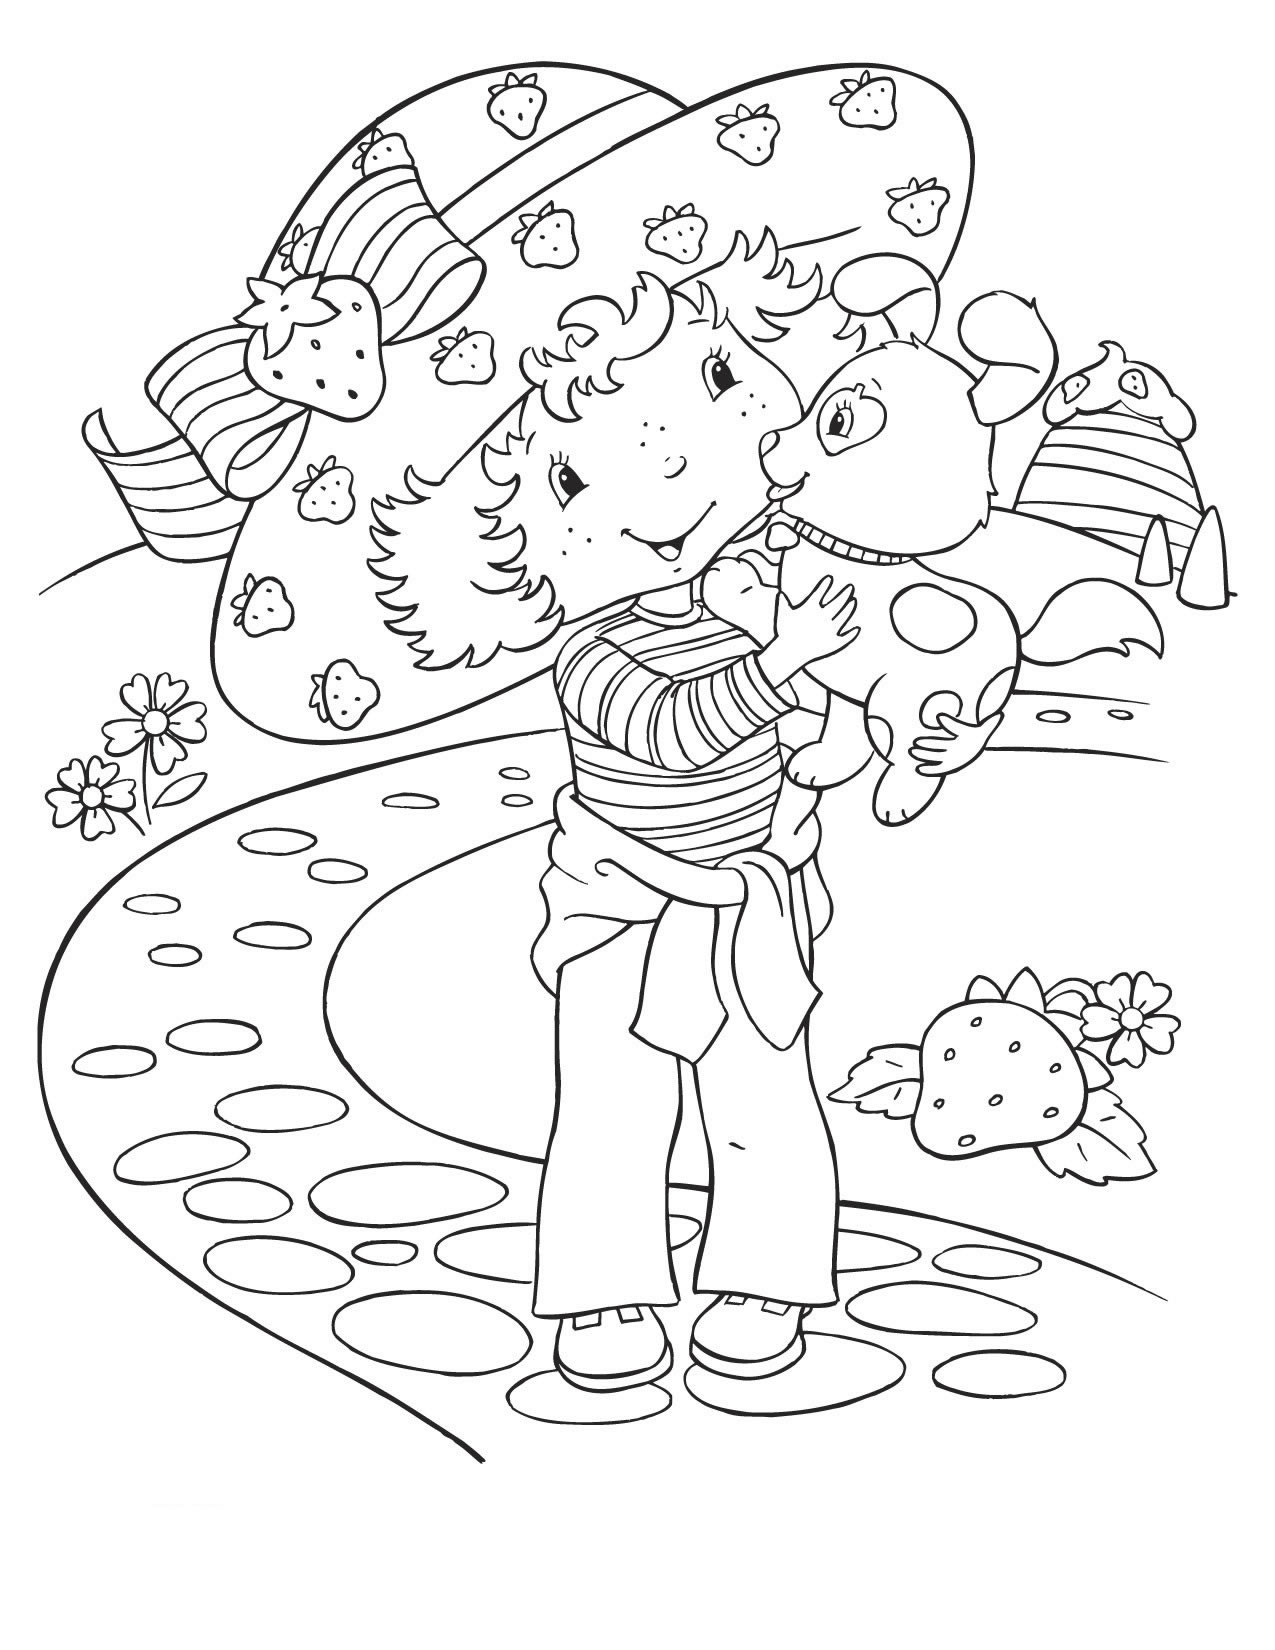 Strawberry Shortcake Printable Coloring Pages
 Free Printable Strawberry Shortcake Coloring Pages For Kids